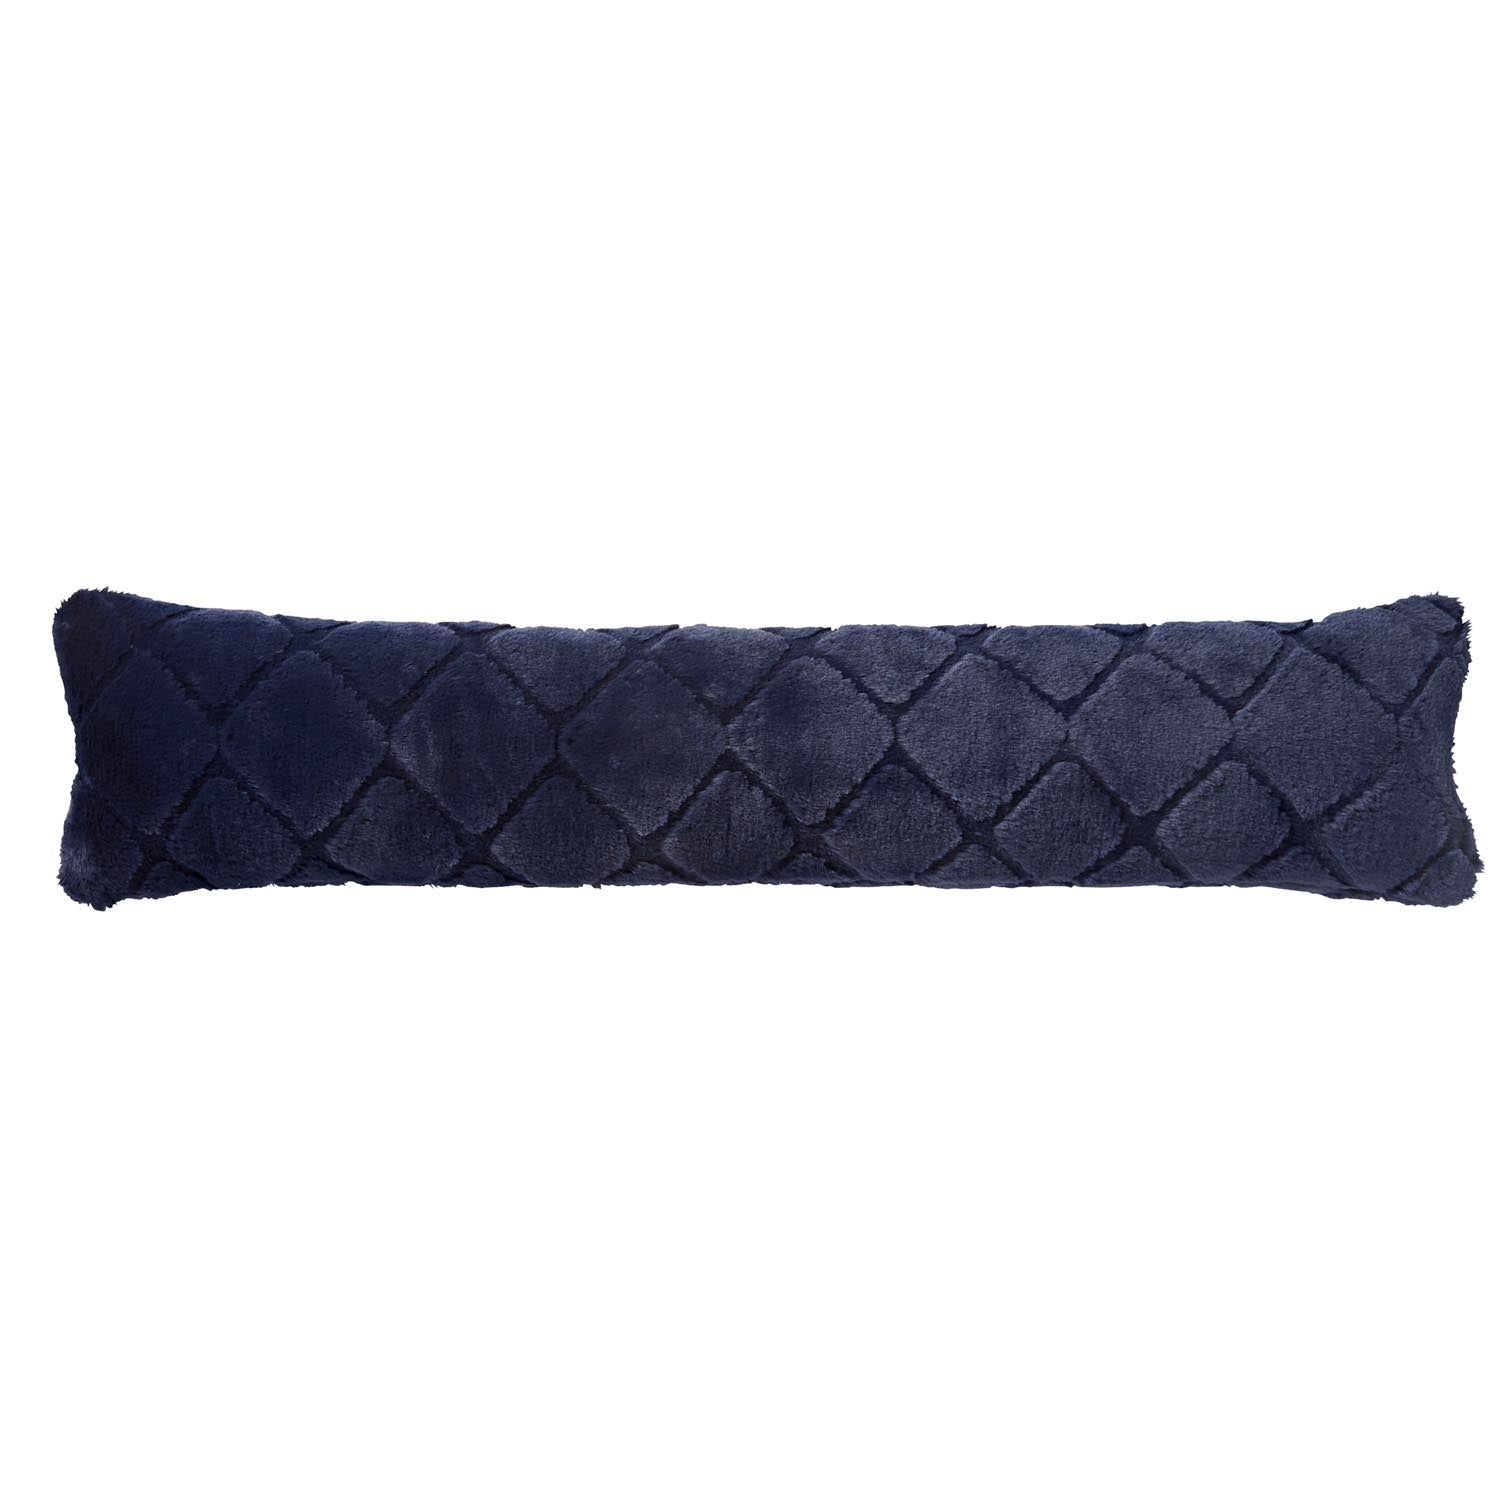 Catherine Lansfield Draught Excluder 90cm x 20cm - Navy / Blue 4 Shaws Department Stores